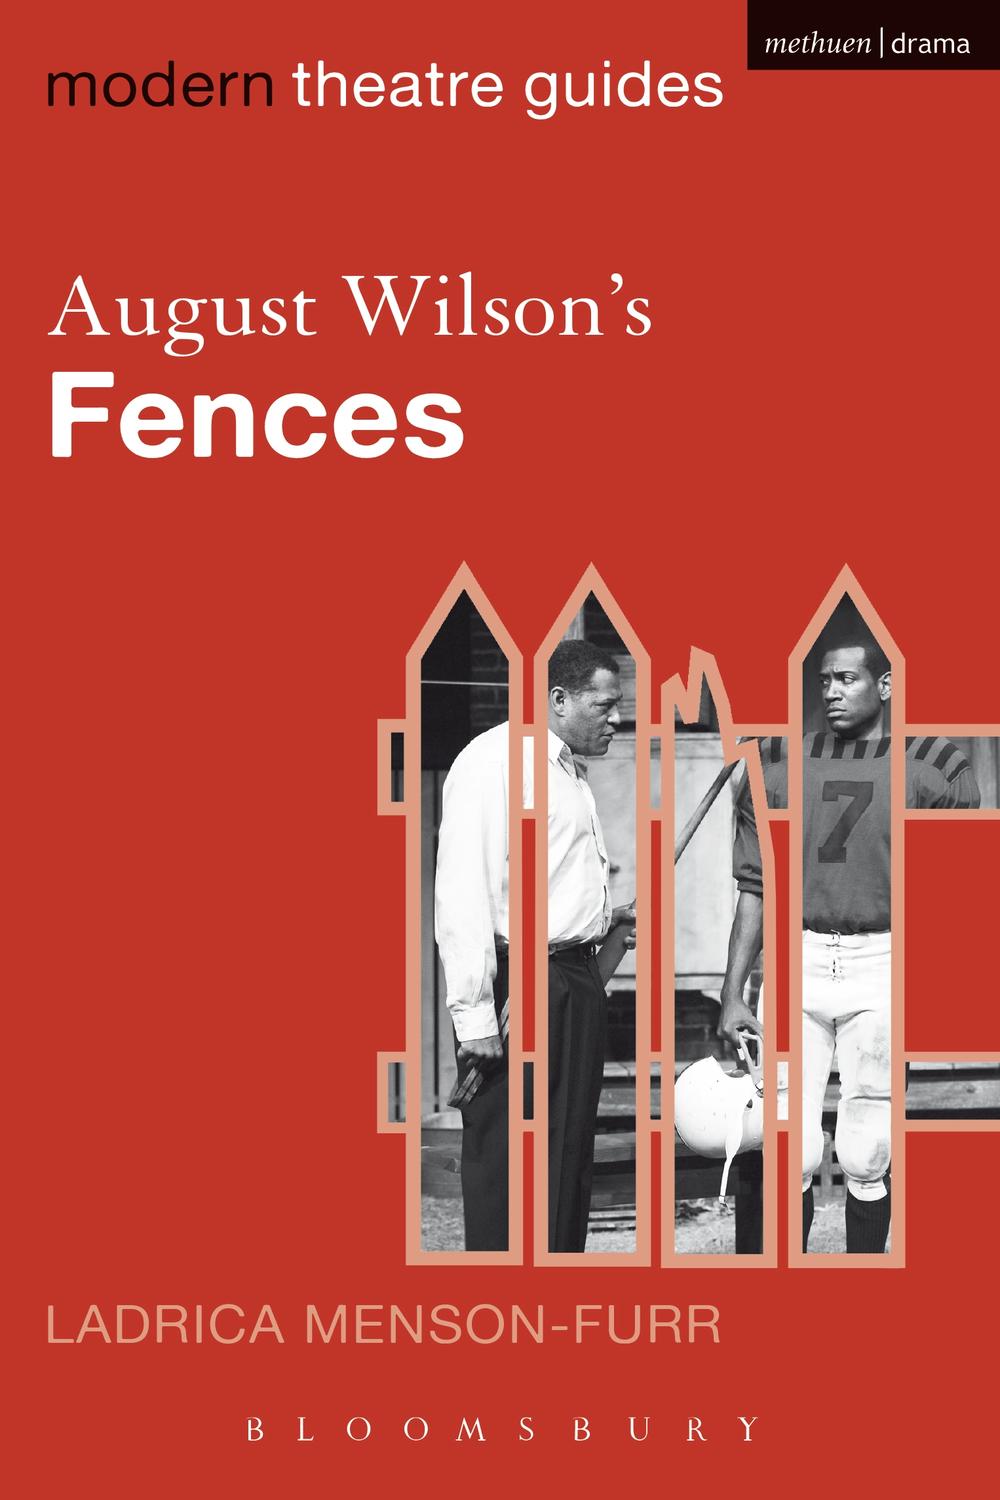 fences by august wilson pdf free download